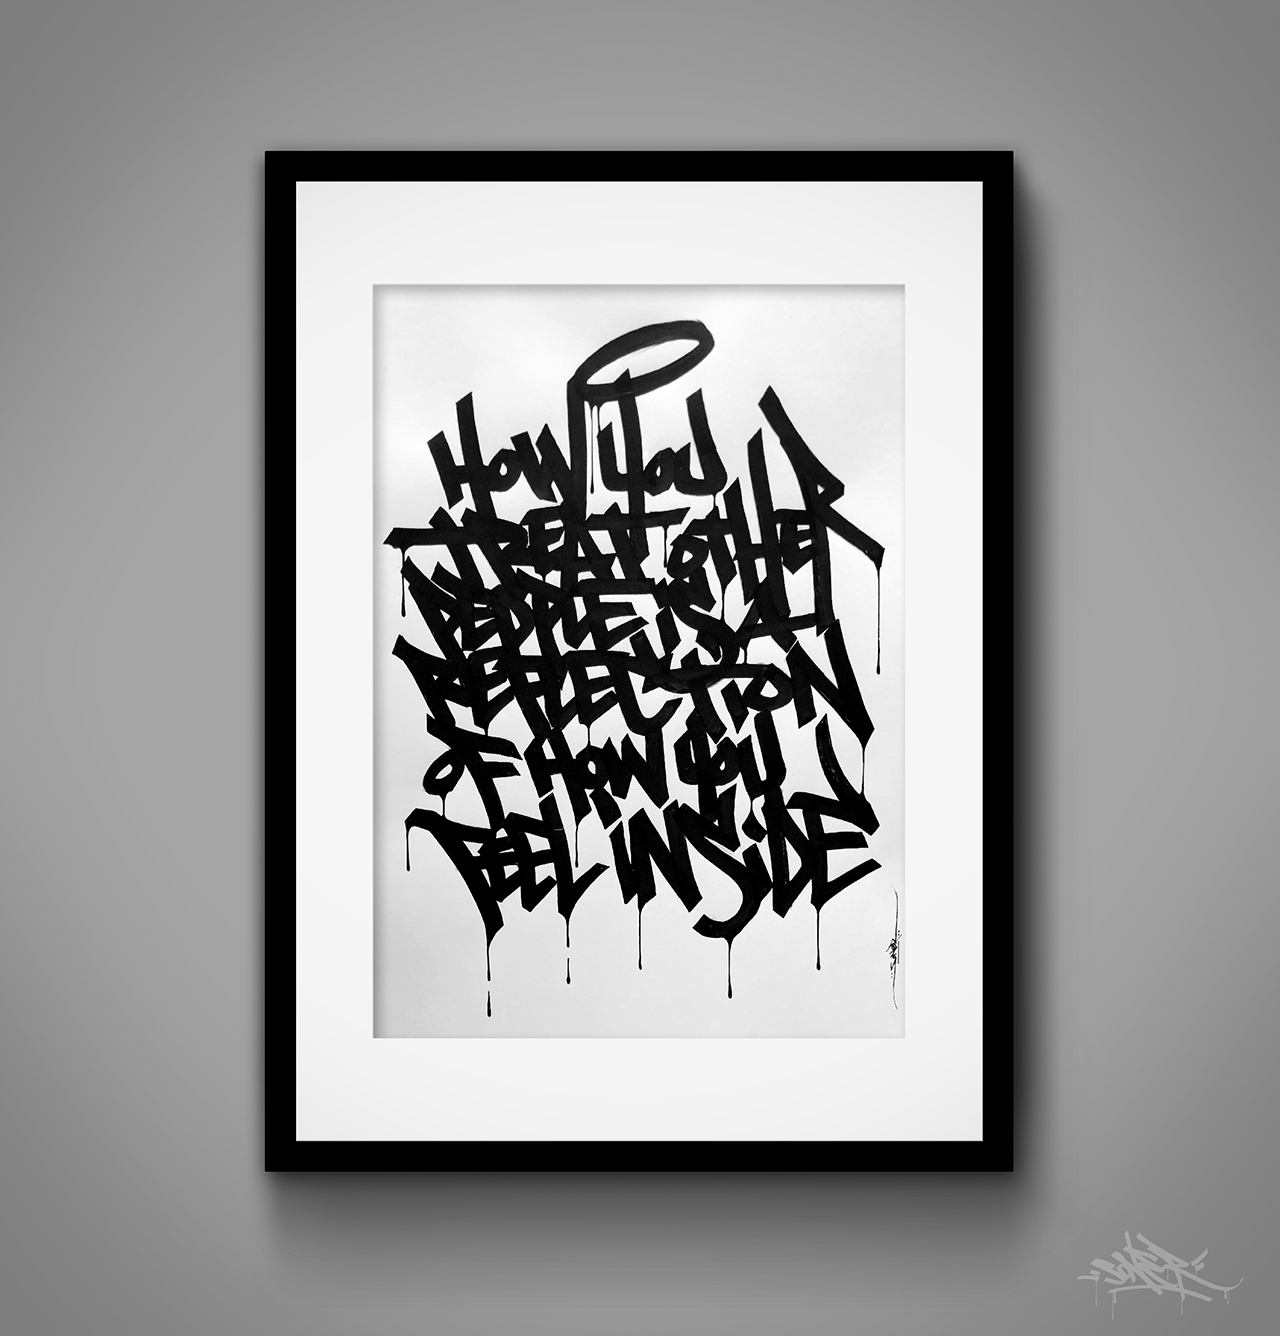 Caligrafitizm projects